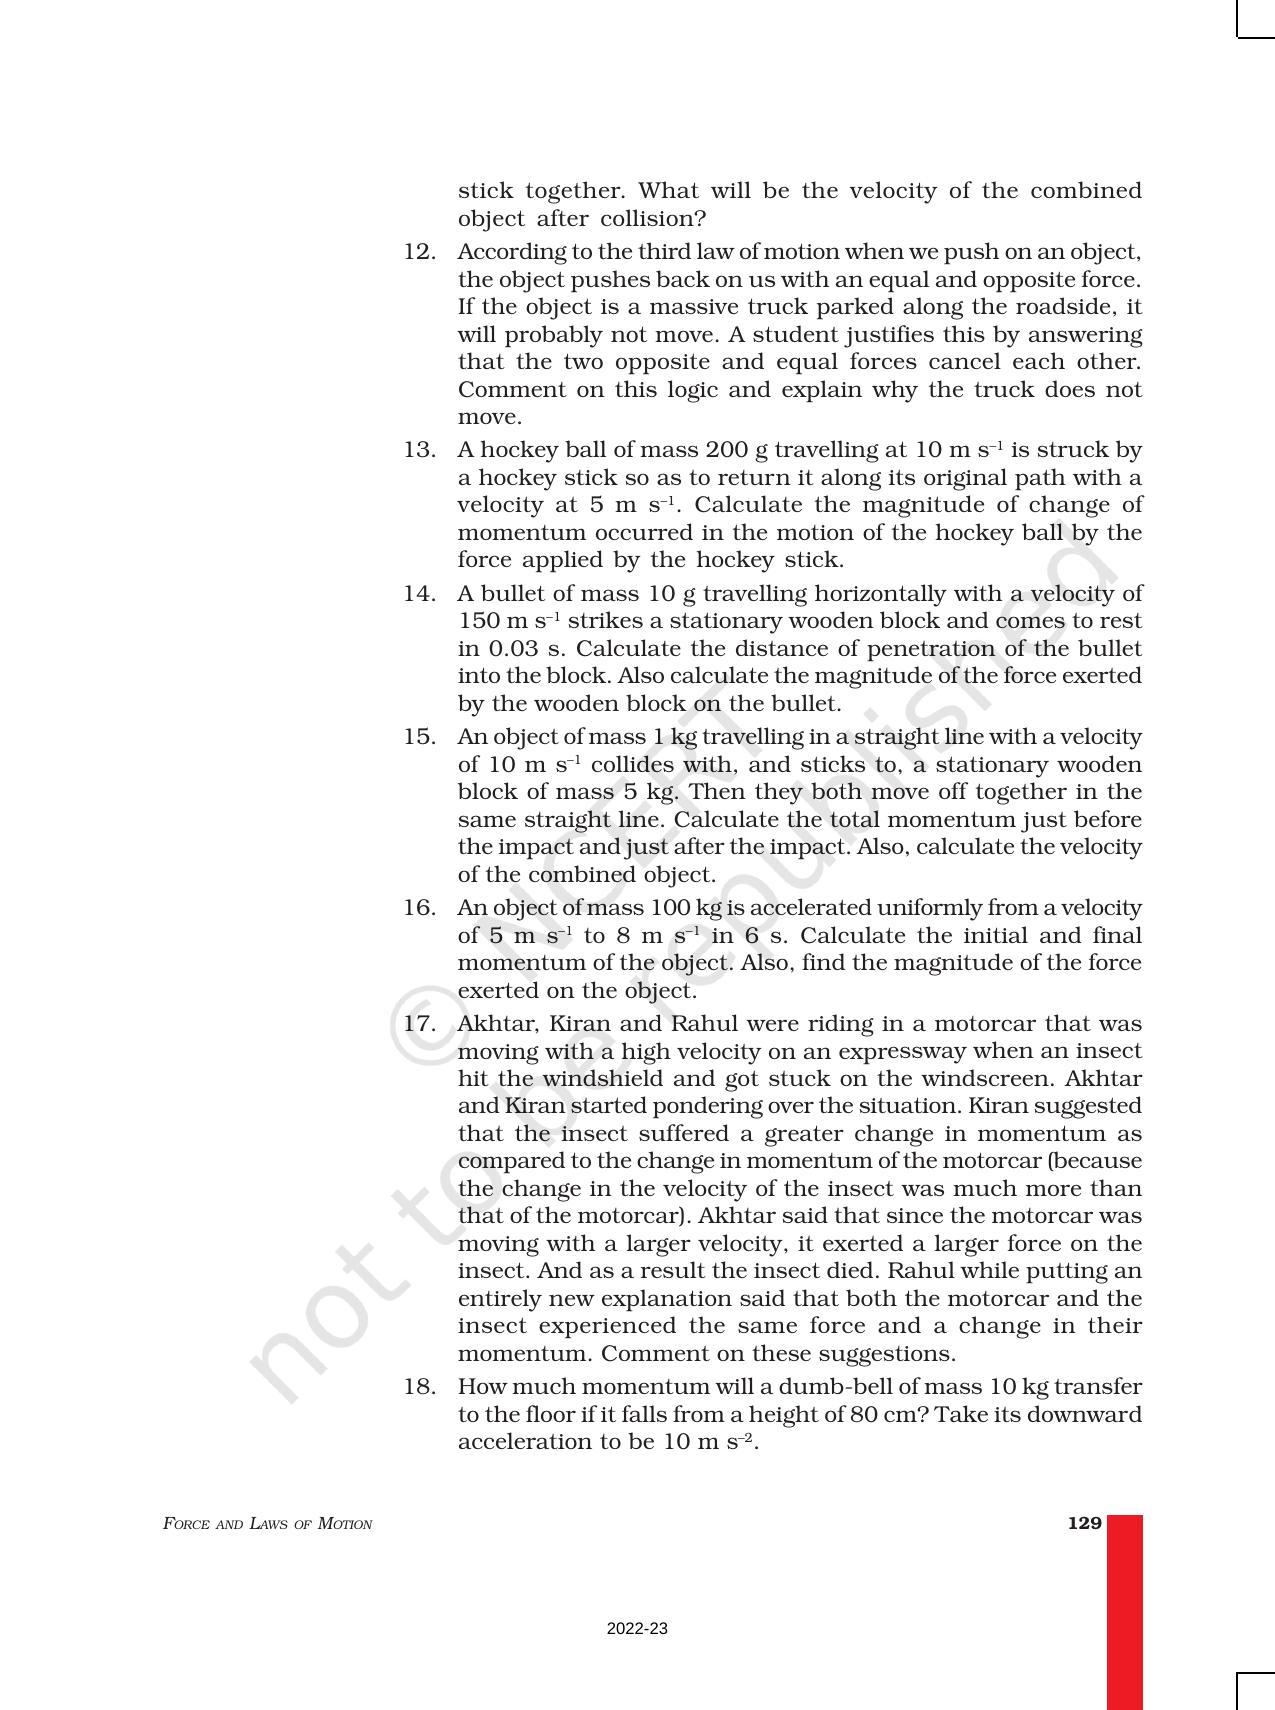 NCERT Book for Class 9 Science Chapter 9 Force And Laws Of Motion - Page 16